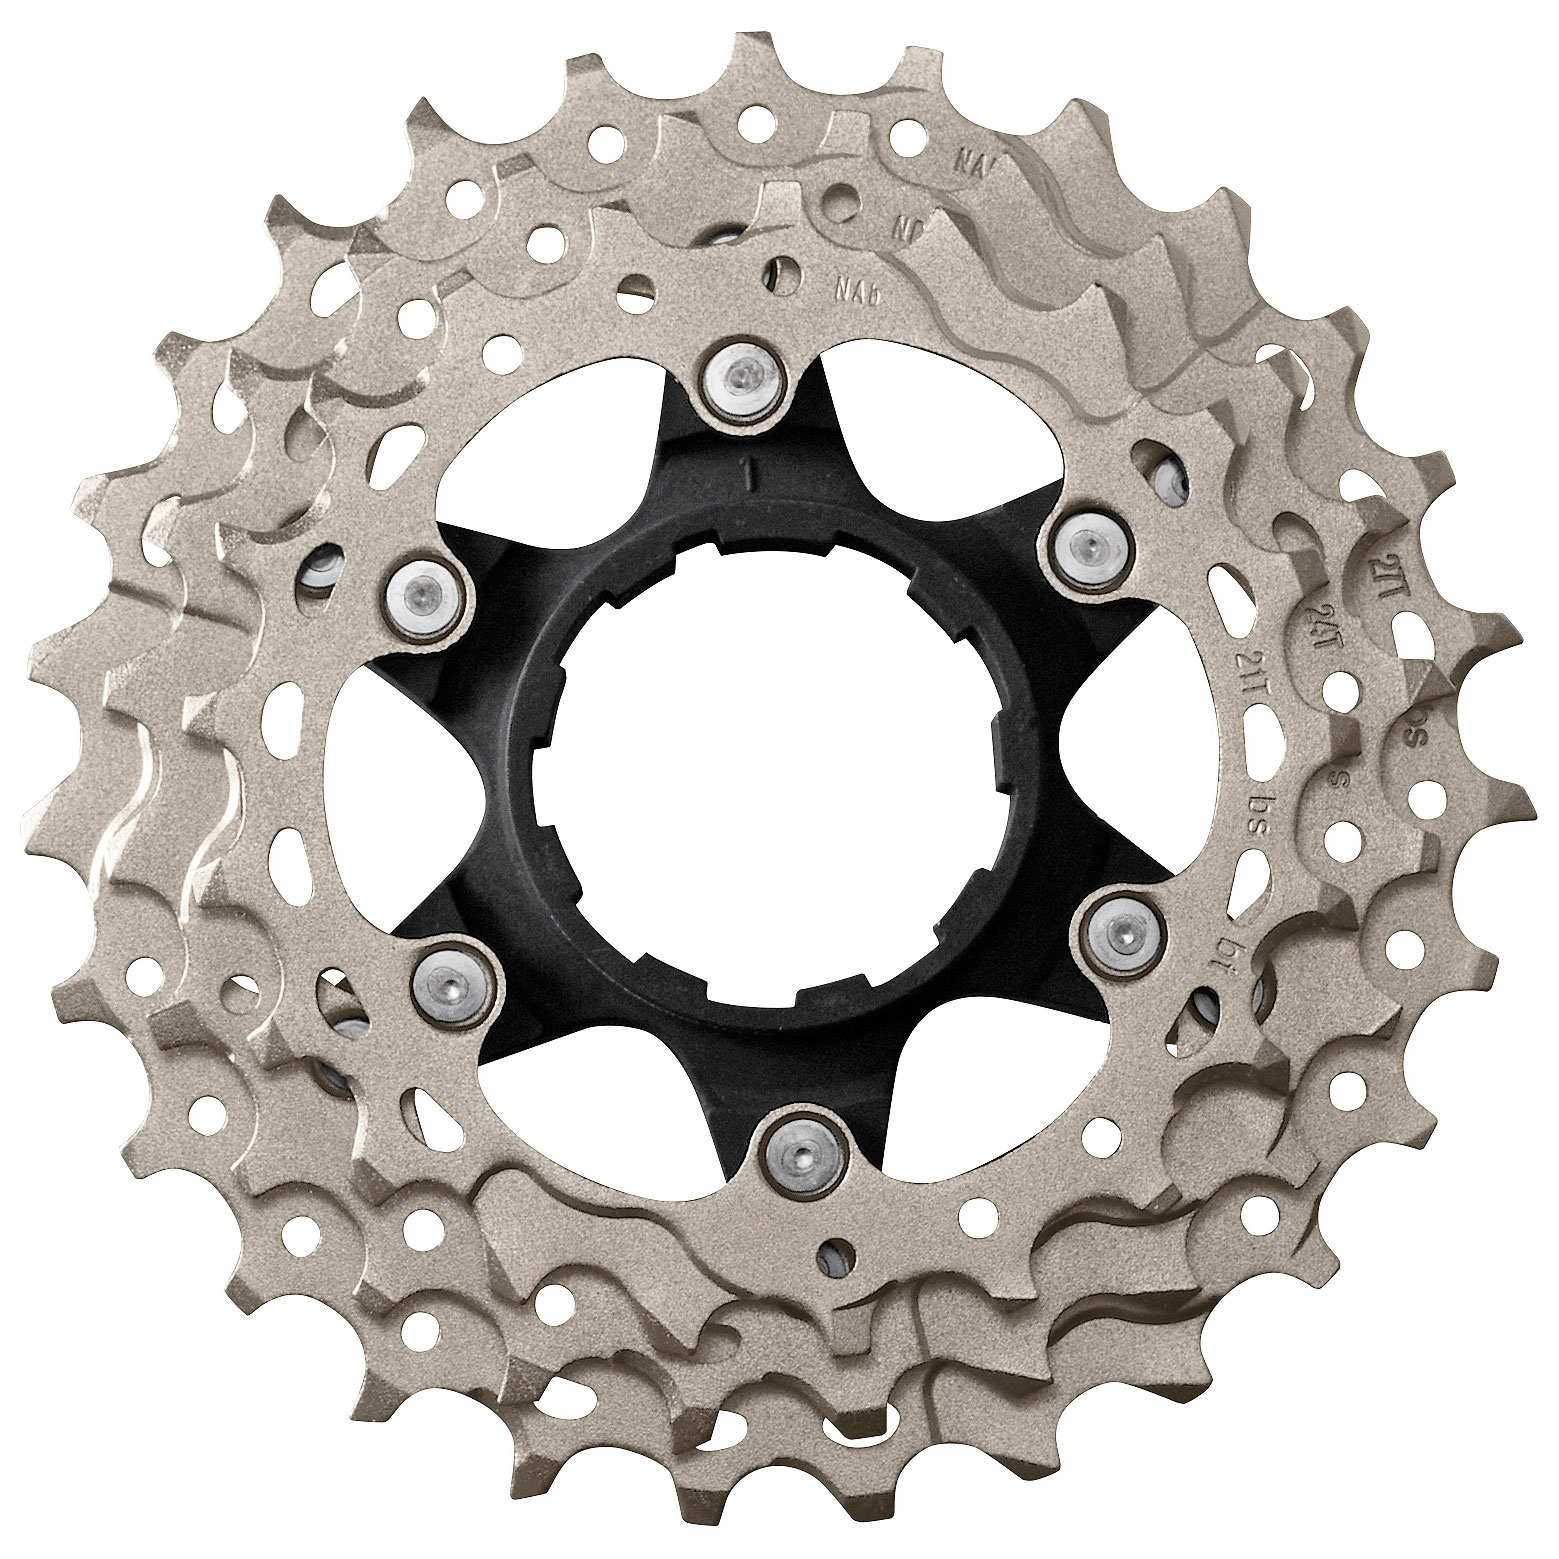 Picture of Shimano Sprocket for Deore XT / SLX 11-speed Cassette - 21/24/27 teeth for 11-40 (Y1RK98020) - CS-M8000